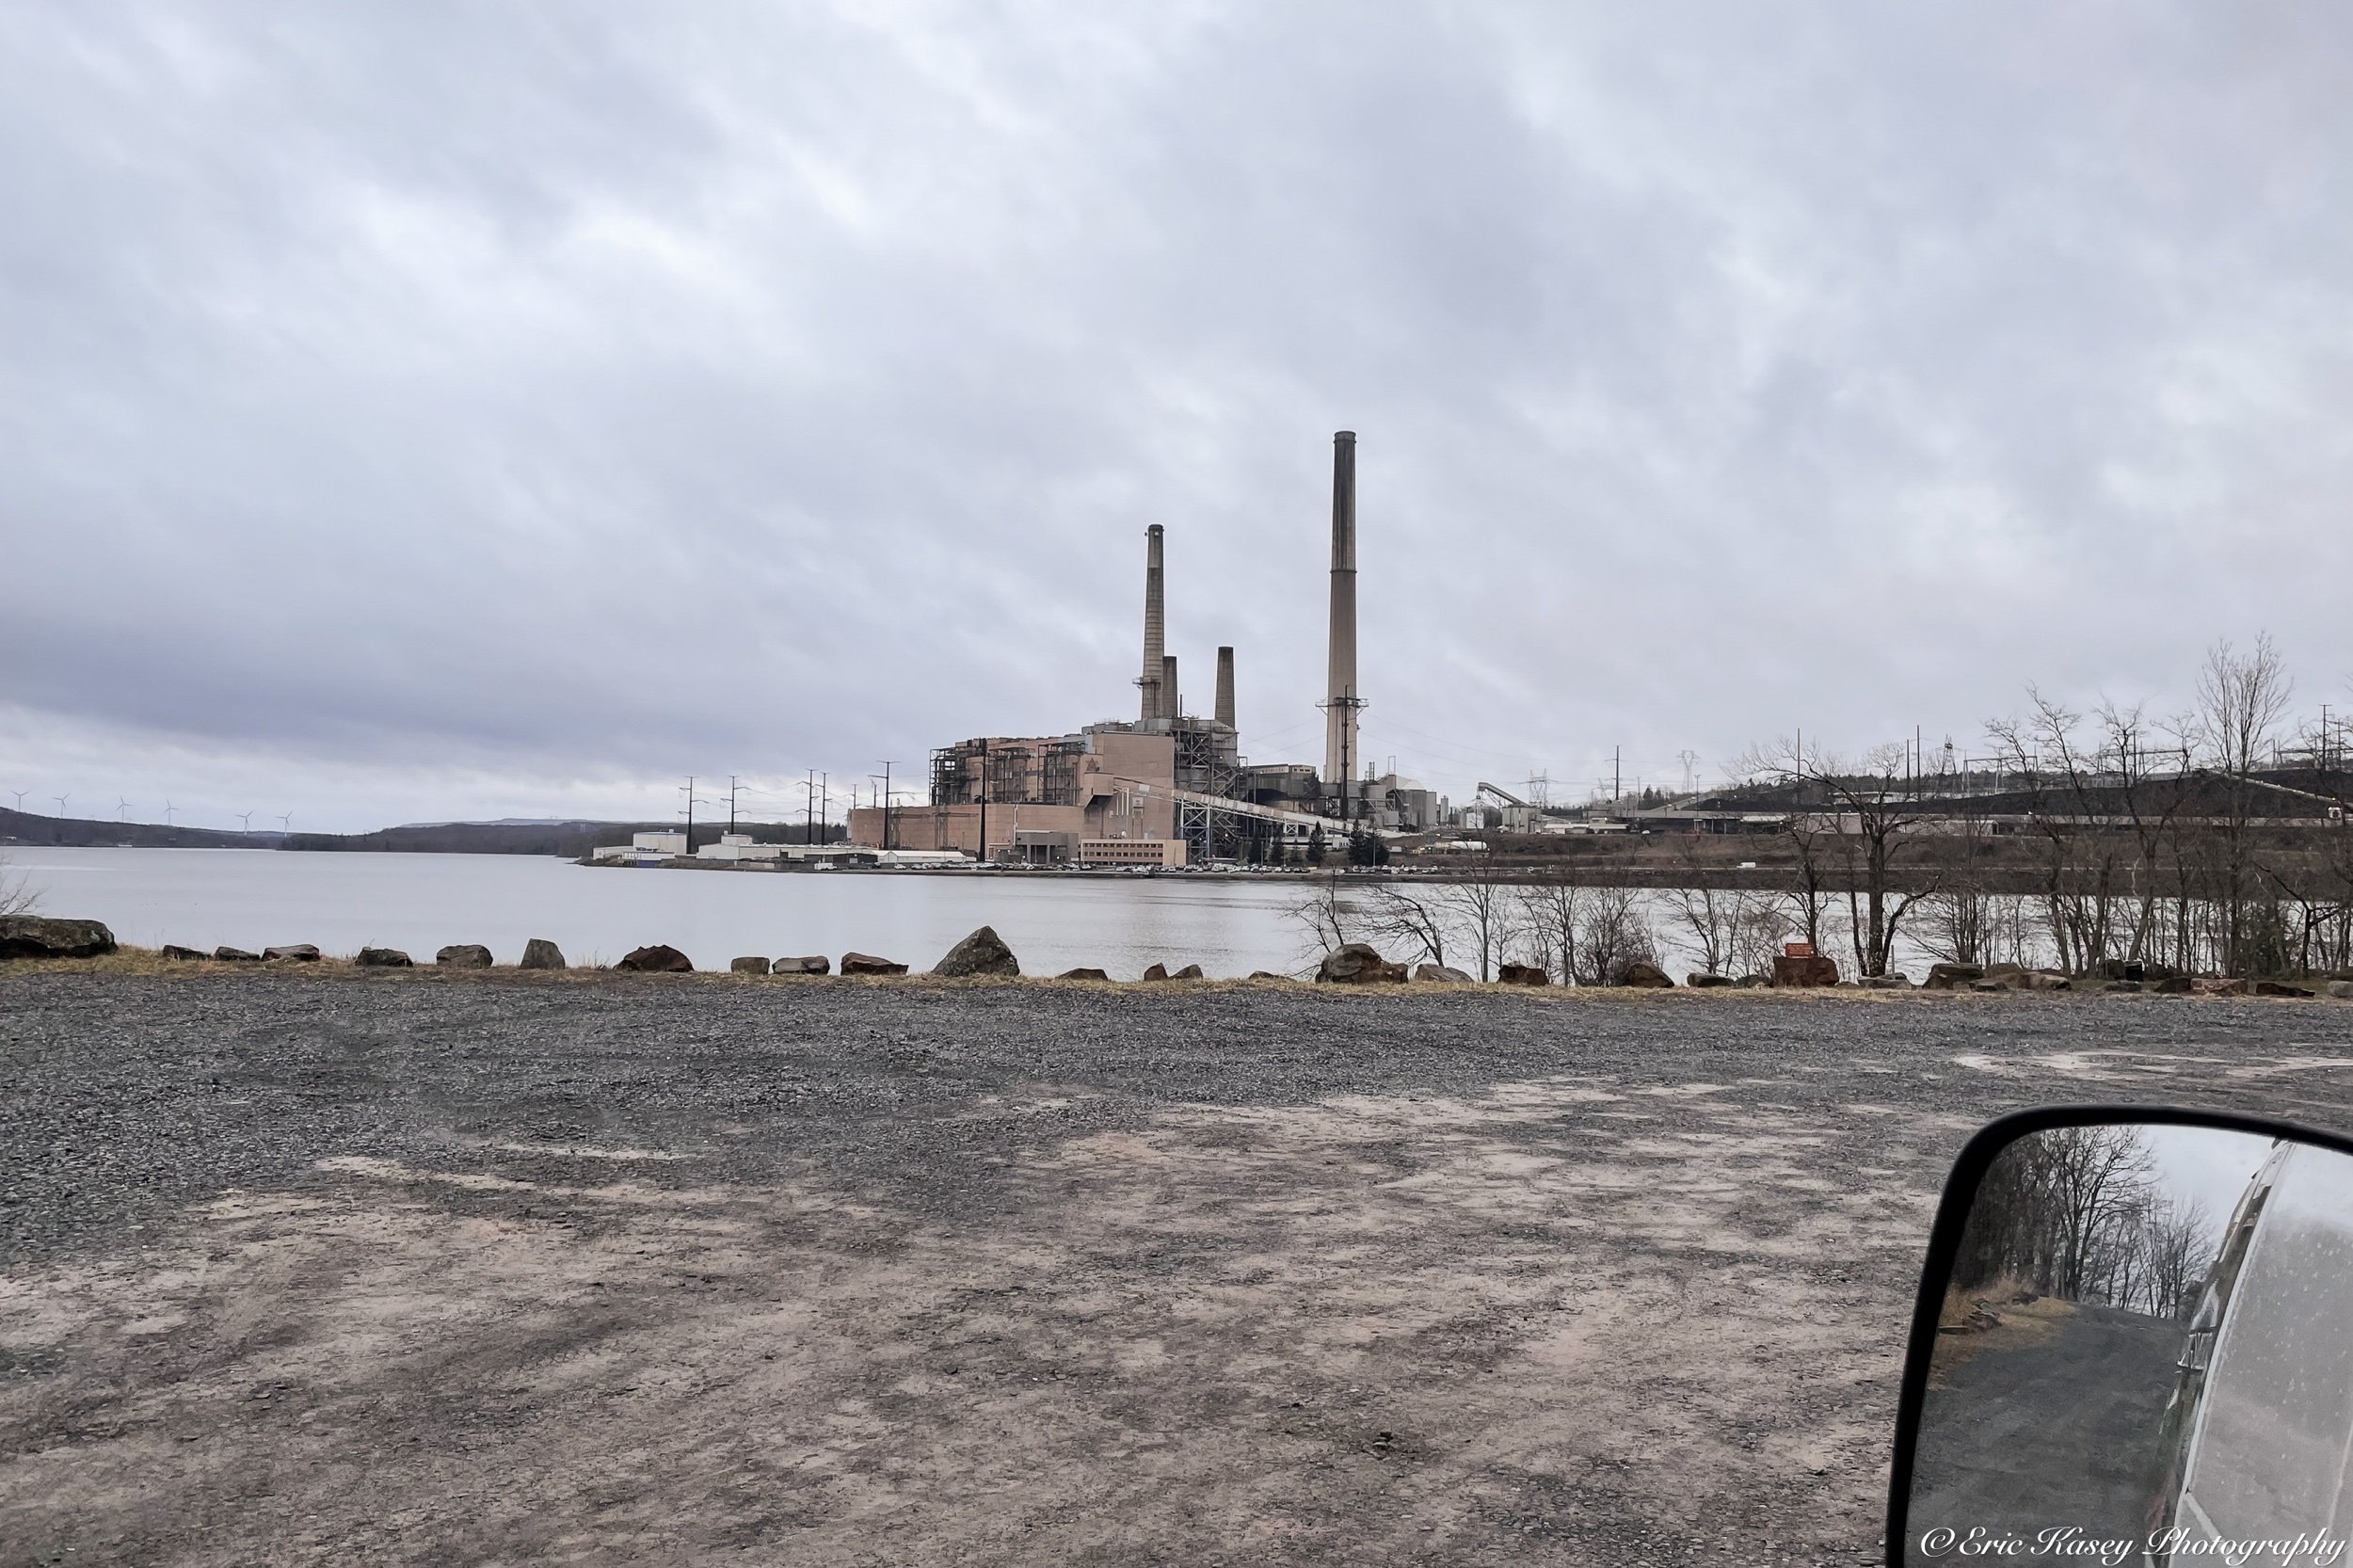 The Dominion Power Station of Mount Storm, WV on April 5th, 2022.jpeg